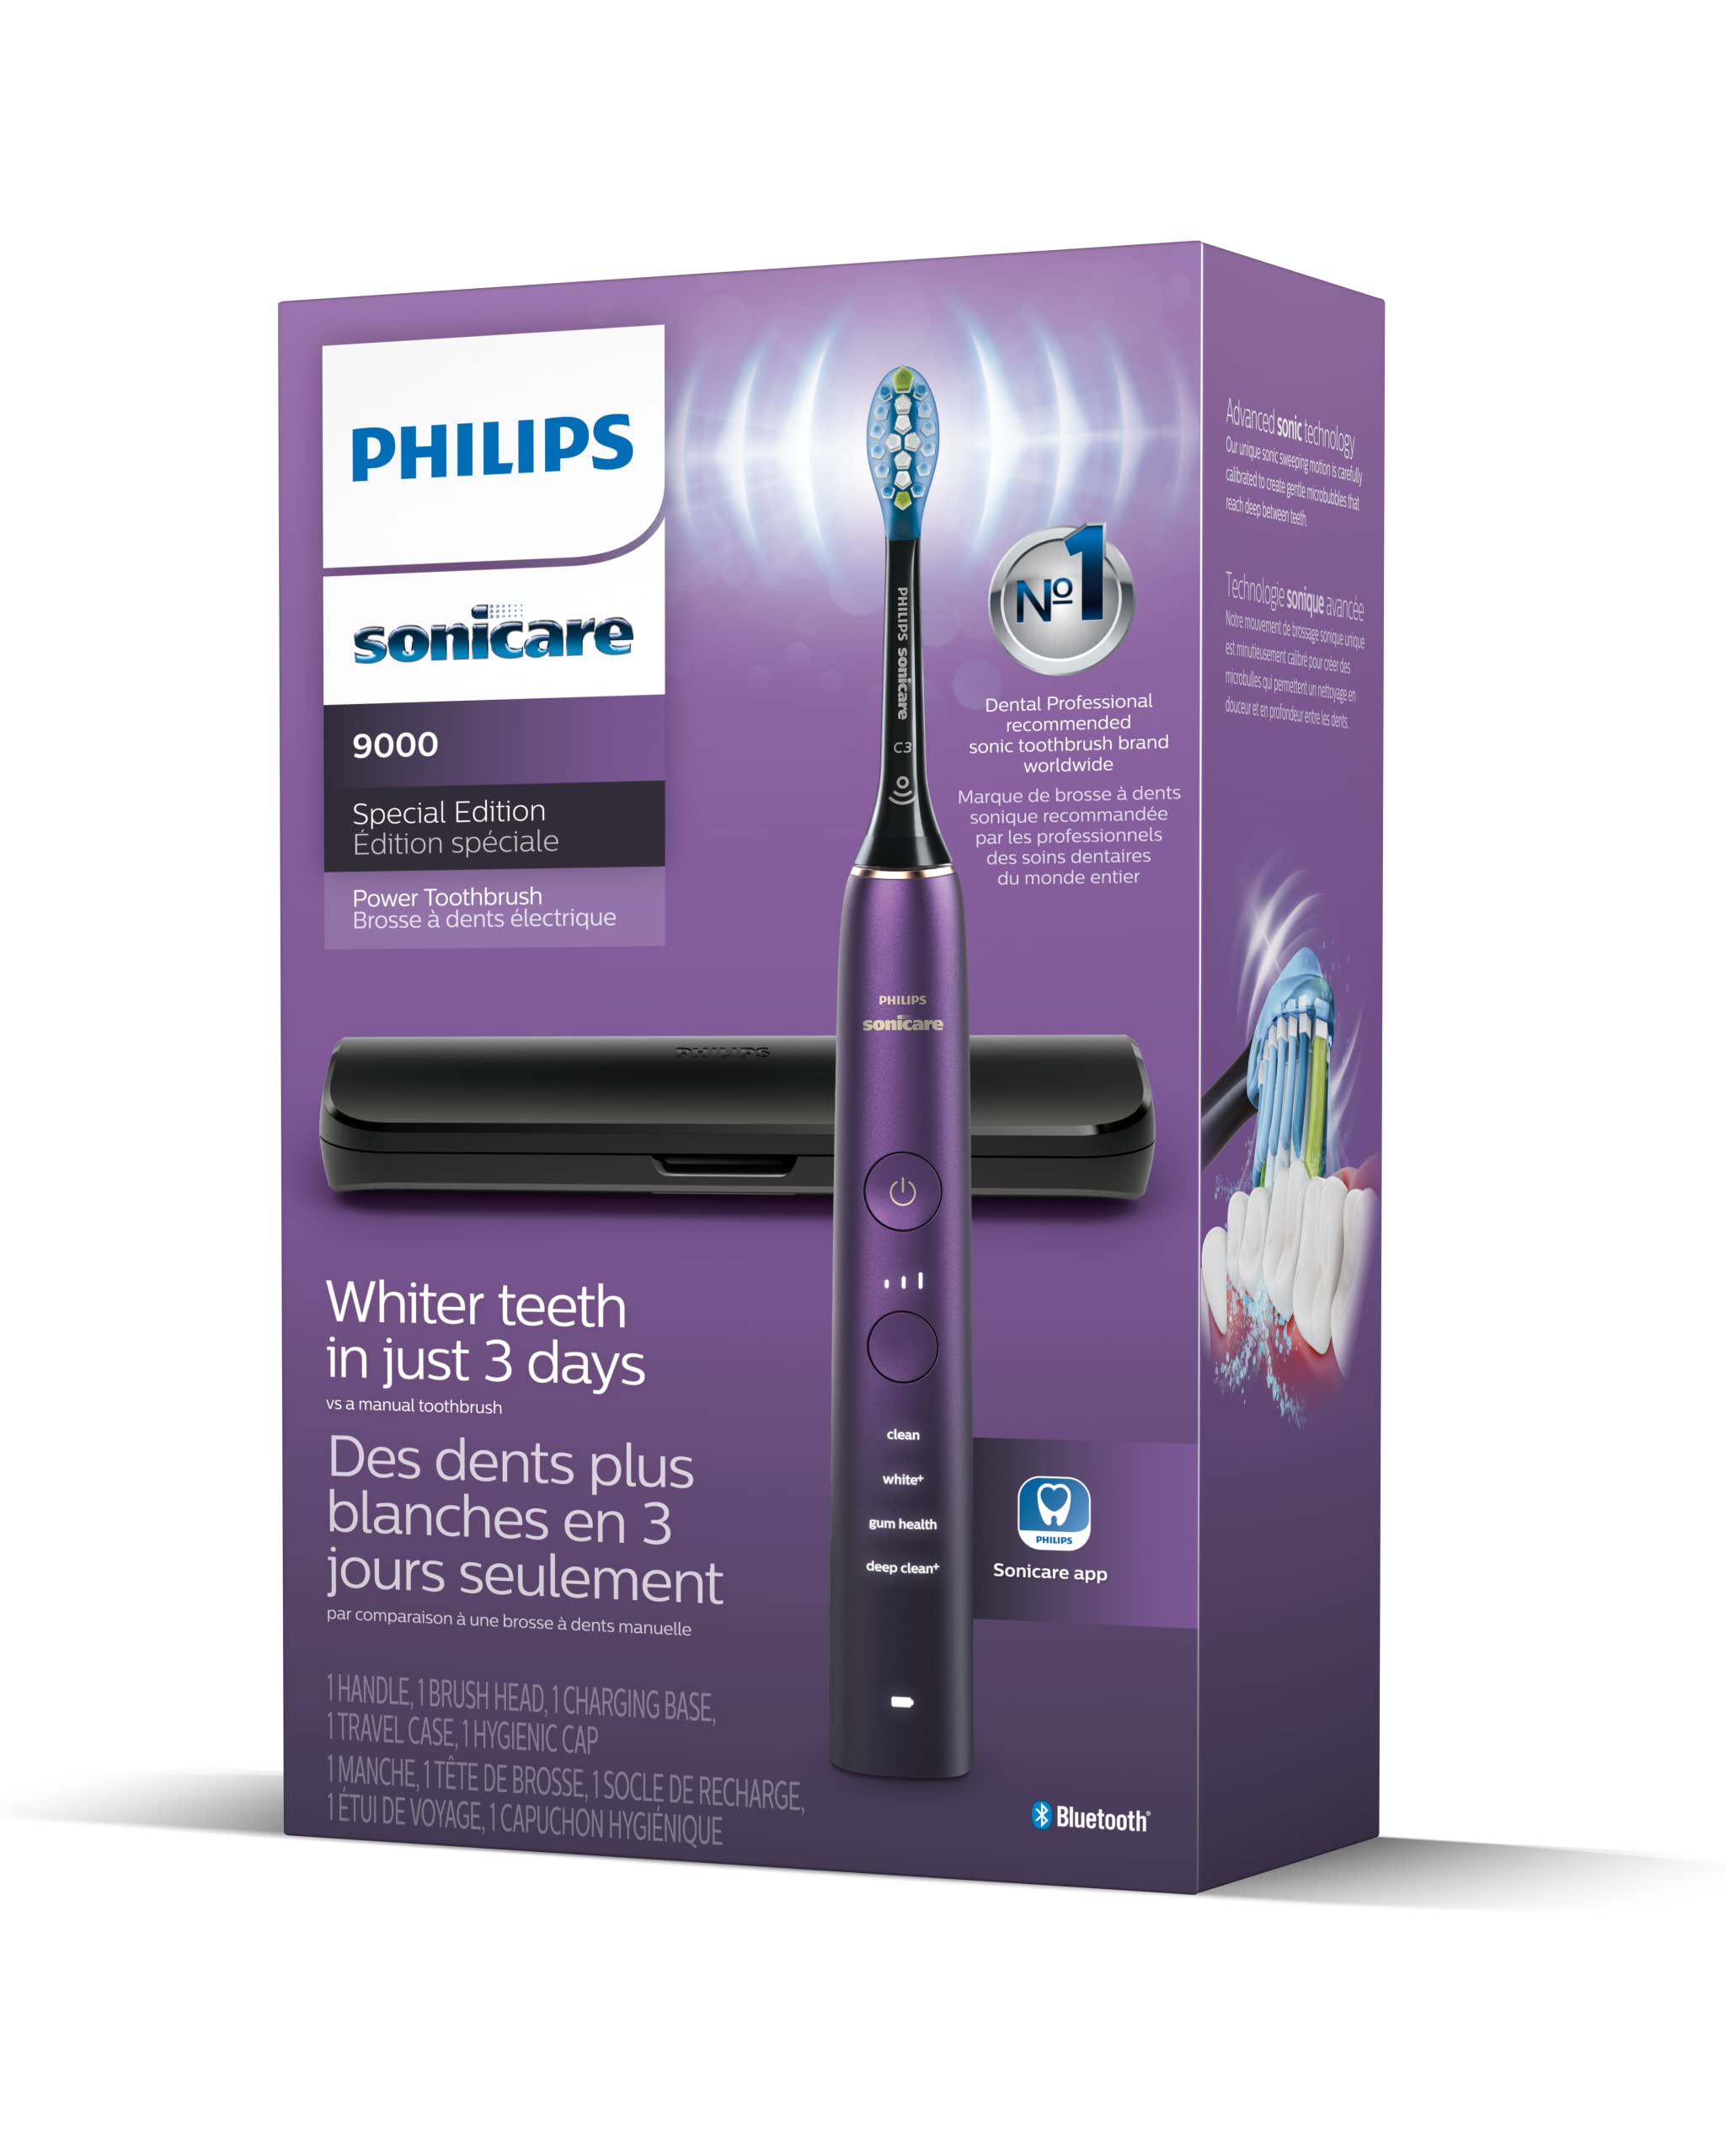 PHILIPS Sonicare 9000 Special Edition Rechargeable Toothbrush, Black/Purple, HX9911/91